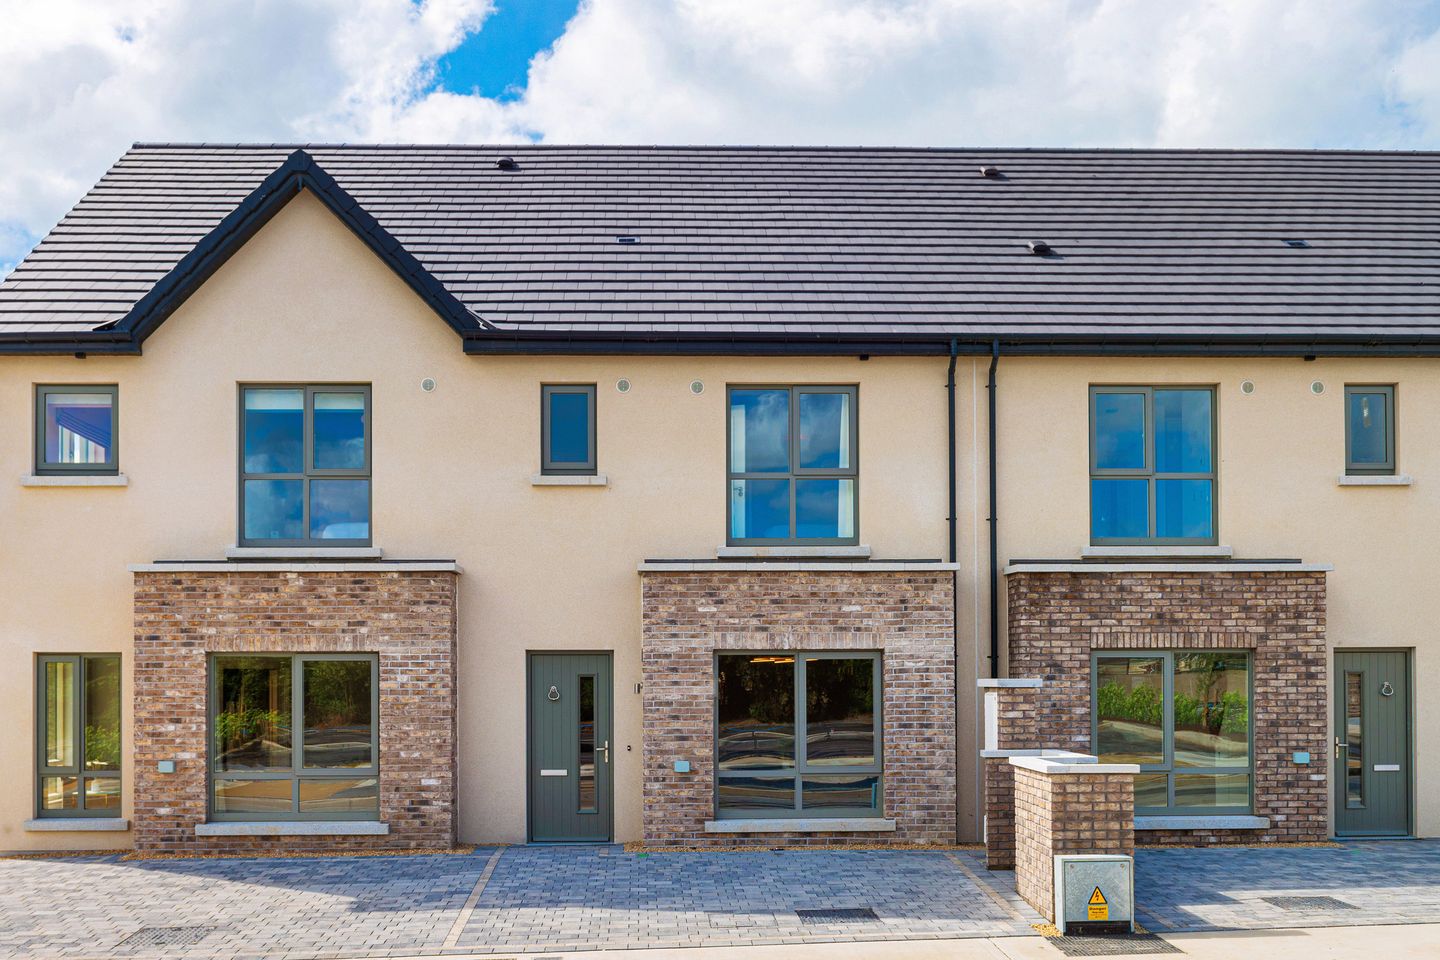 3 Bedroom Mid Terrace Plus Study - Type A, The Bawnogues, The Bawnogues, Kilcock, Co. Kildare